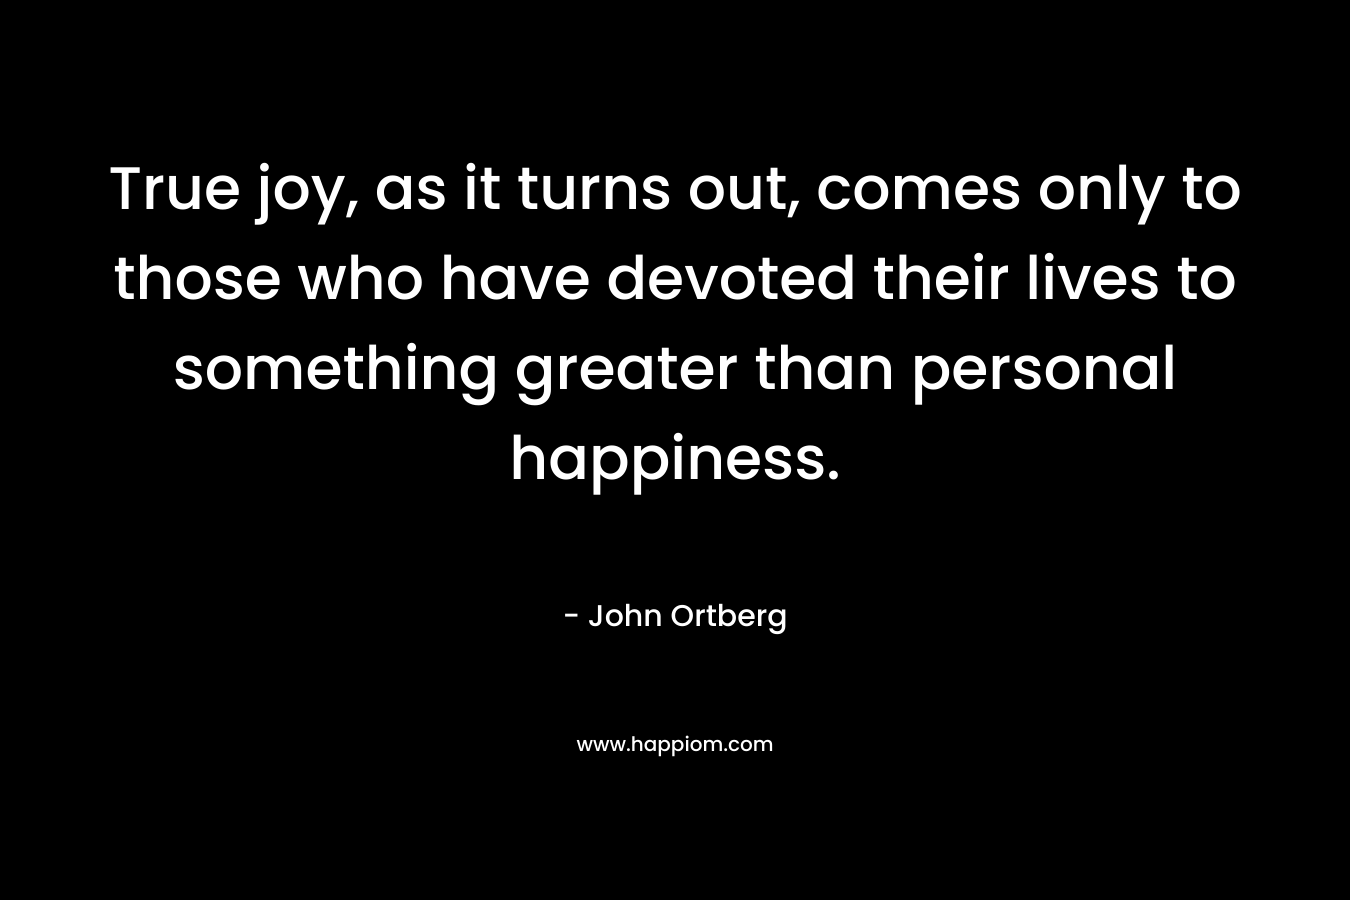 True joy, as it turns out, comes only to those who have devoted their lives to something greater than personal happiness.